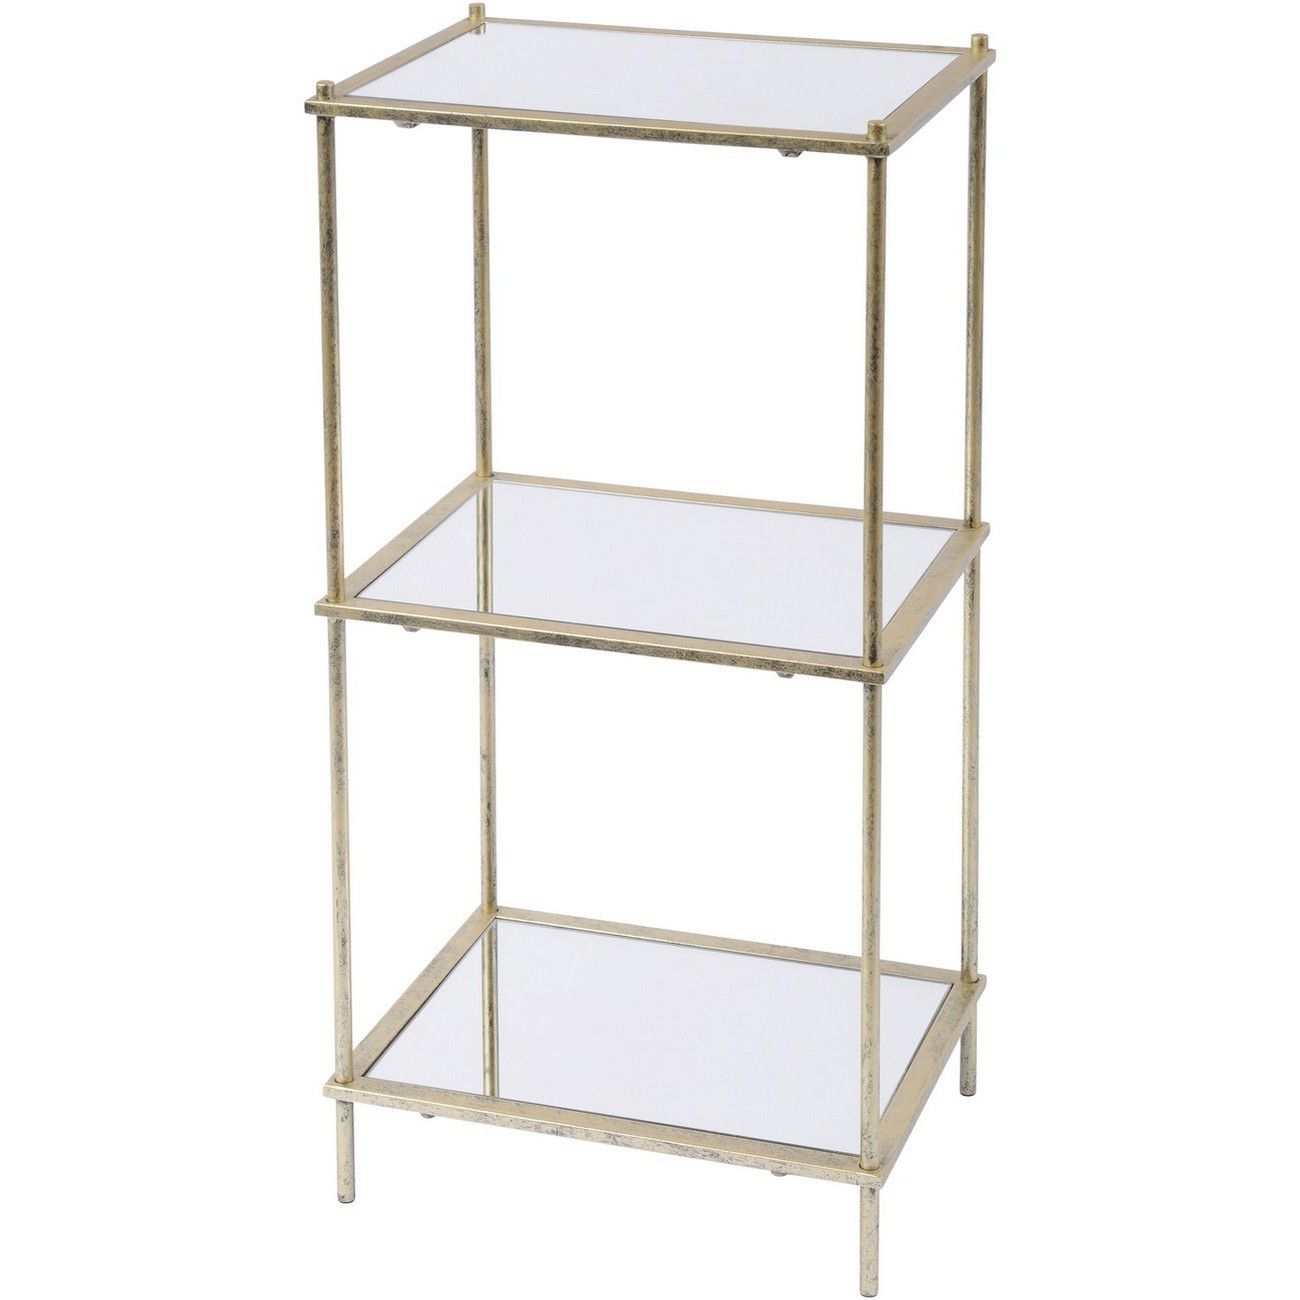 Mylas 3 tier shelf unit CLEARANCE SALE Instore purchase only